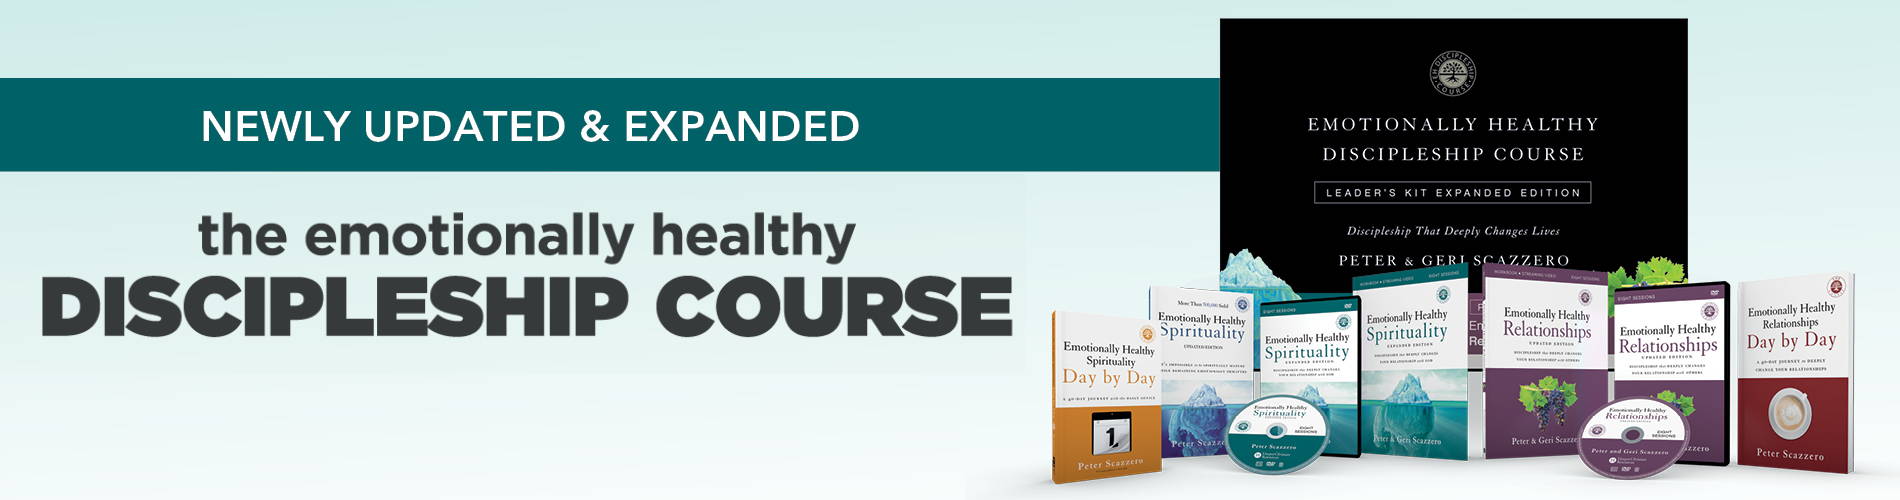 Newly Updated & Expanded The Emotionally healthy Discipleship Course